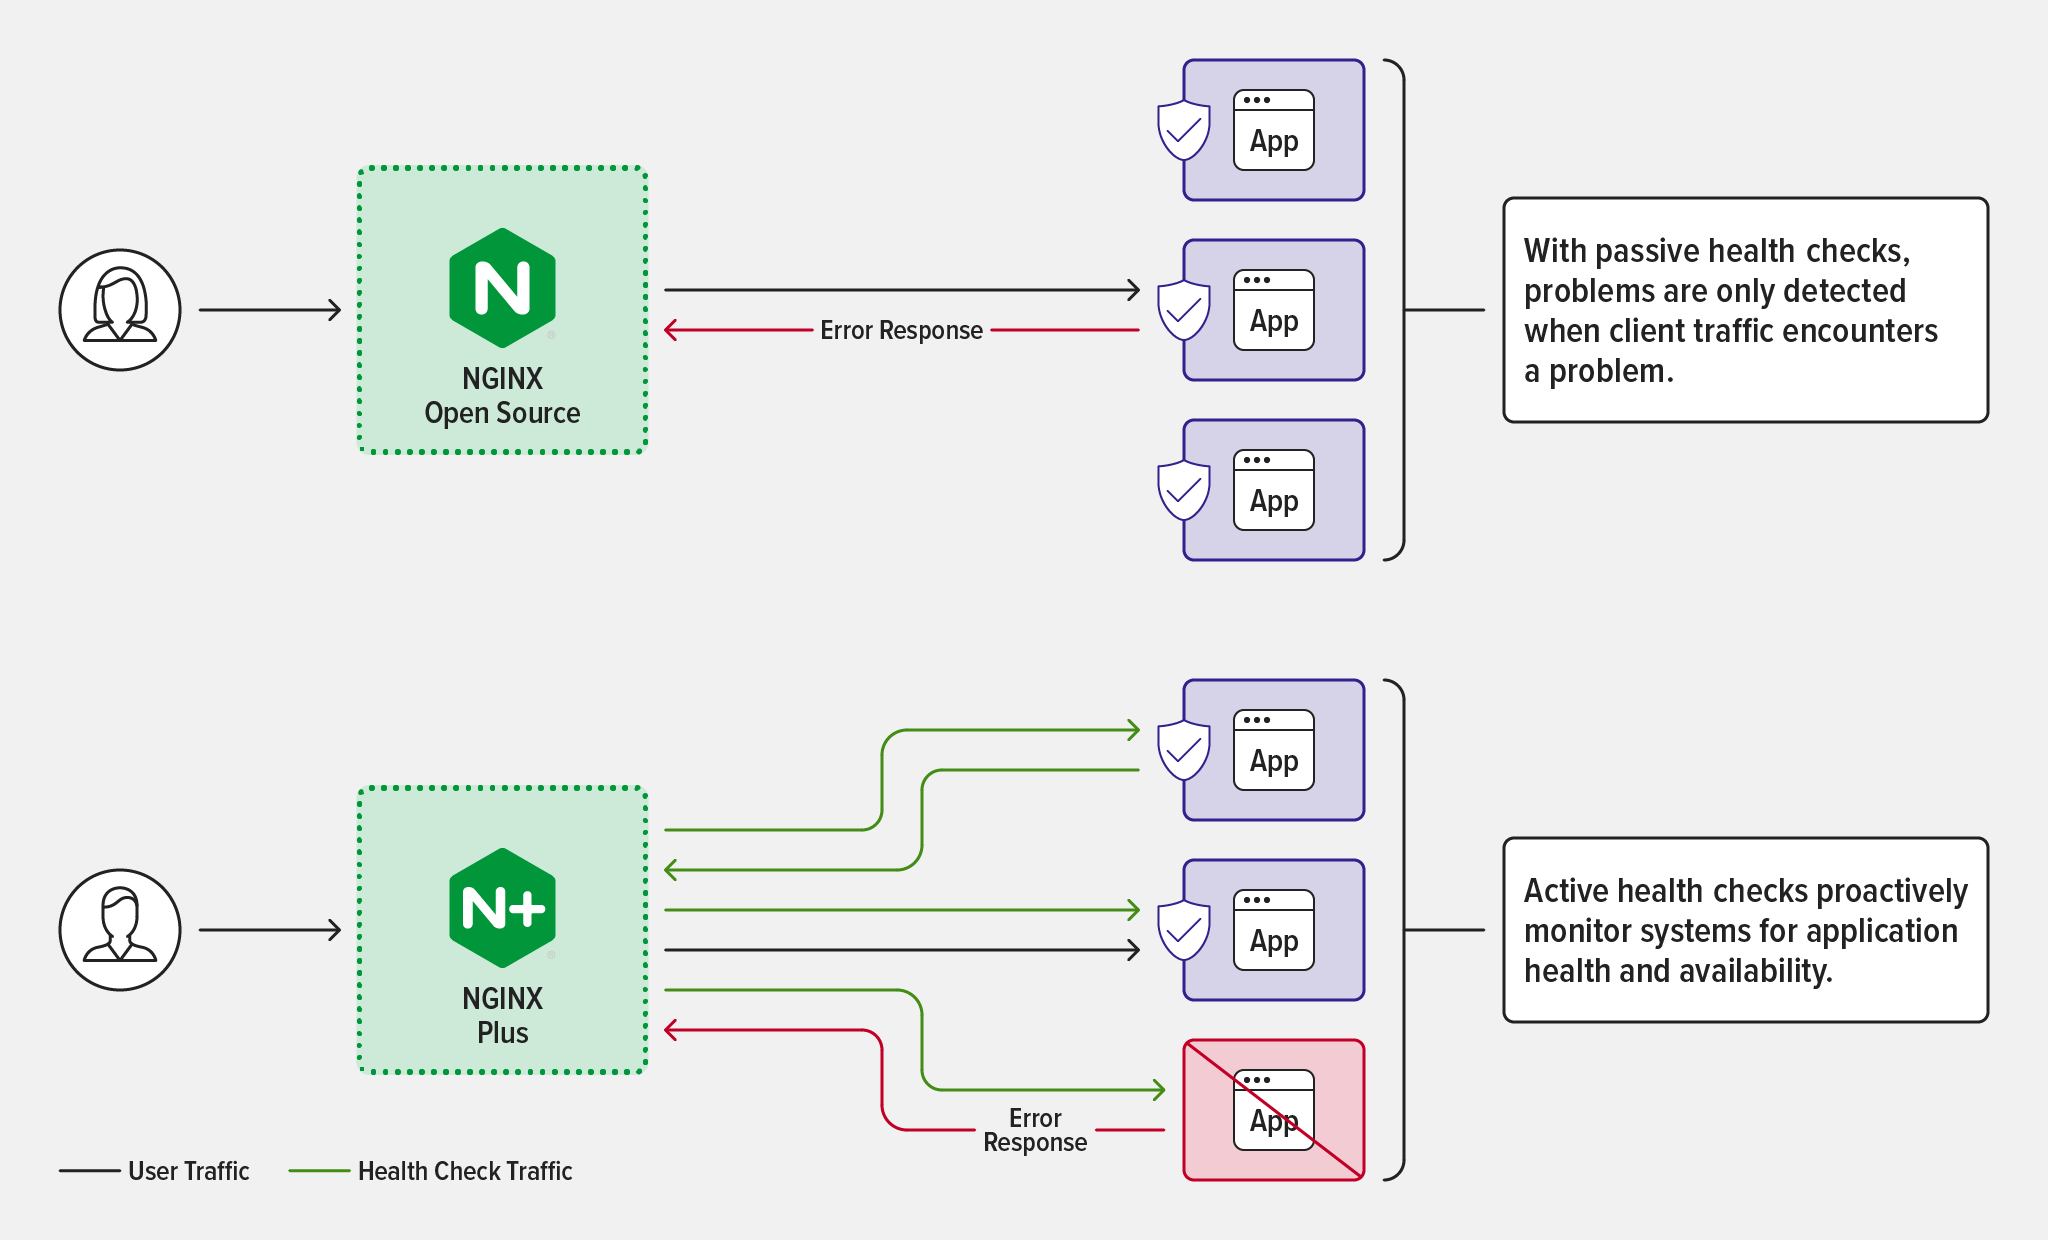 Diagram showing types of traffic NGINX Open Source and NGINX Plus used for passive and active health checks